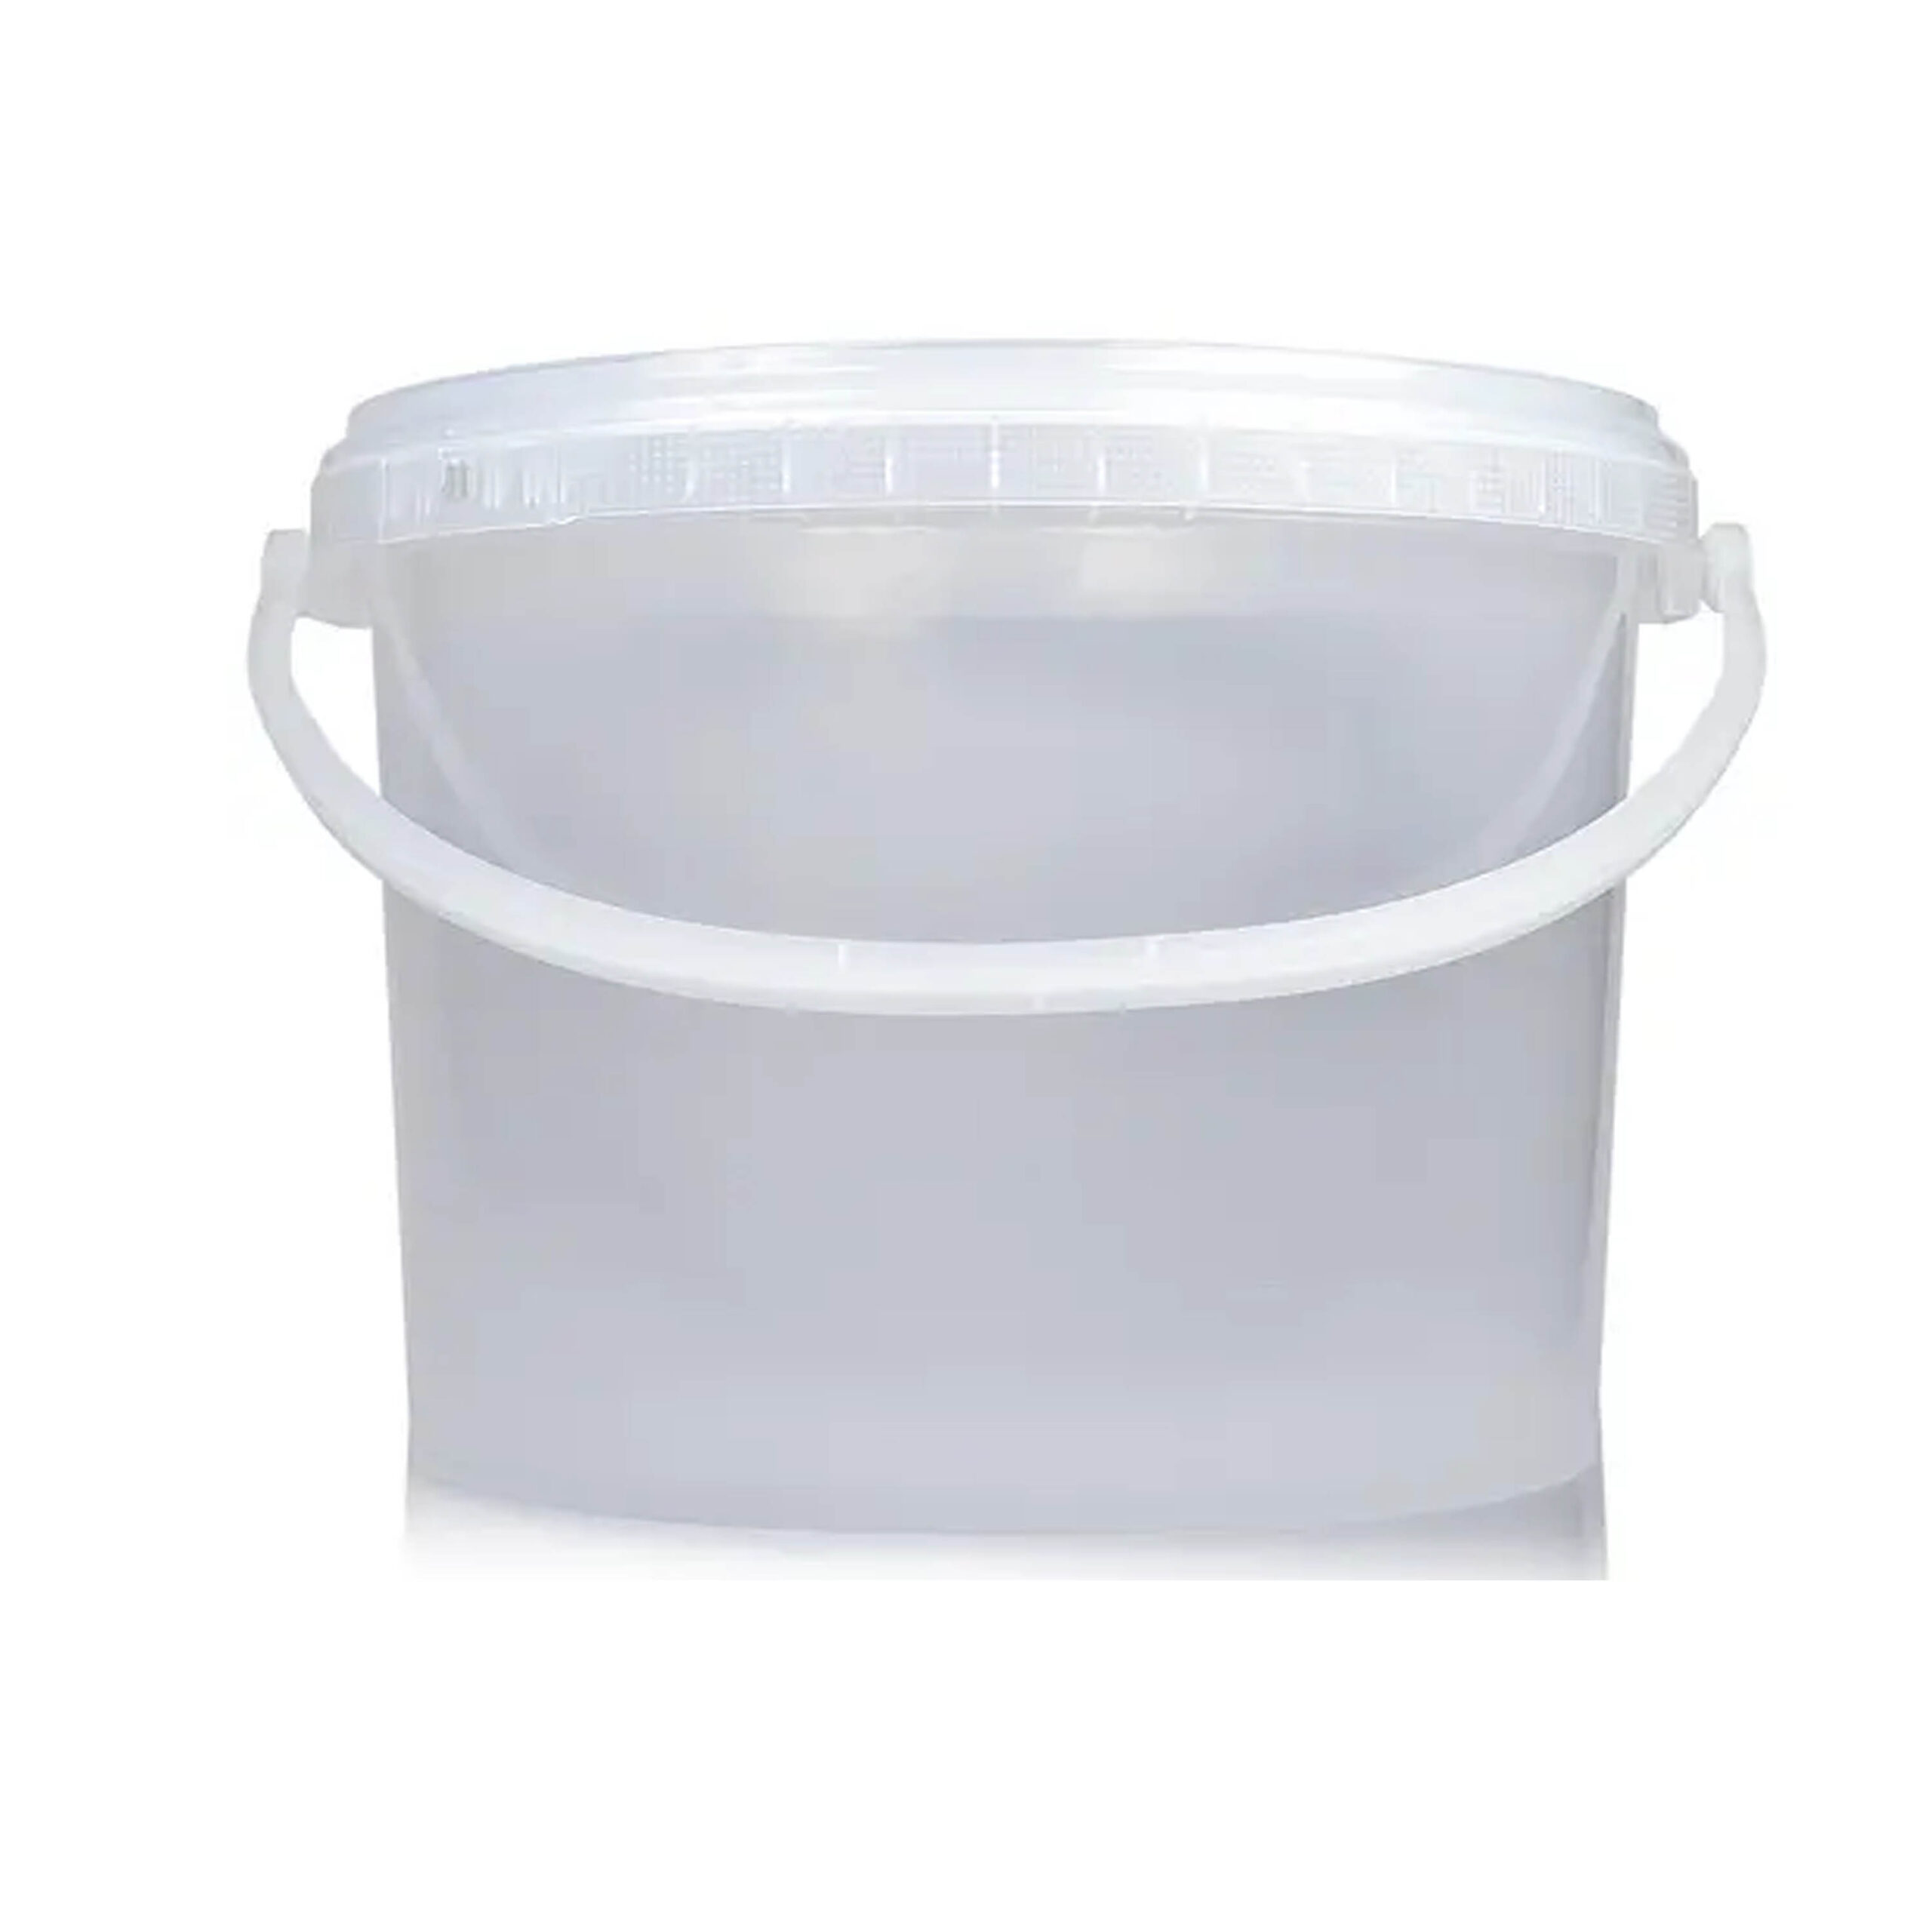 PLASTIC BUCKET WITH LID CLEAR 5LT - 1x5